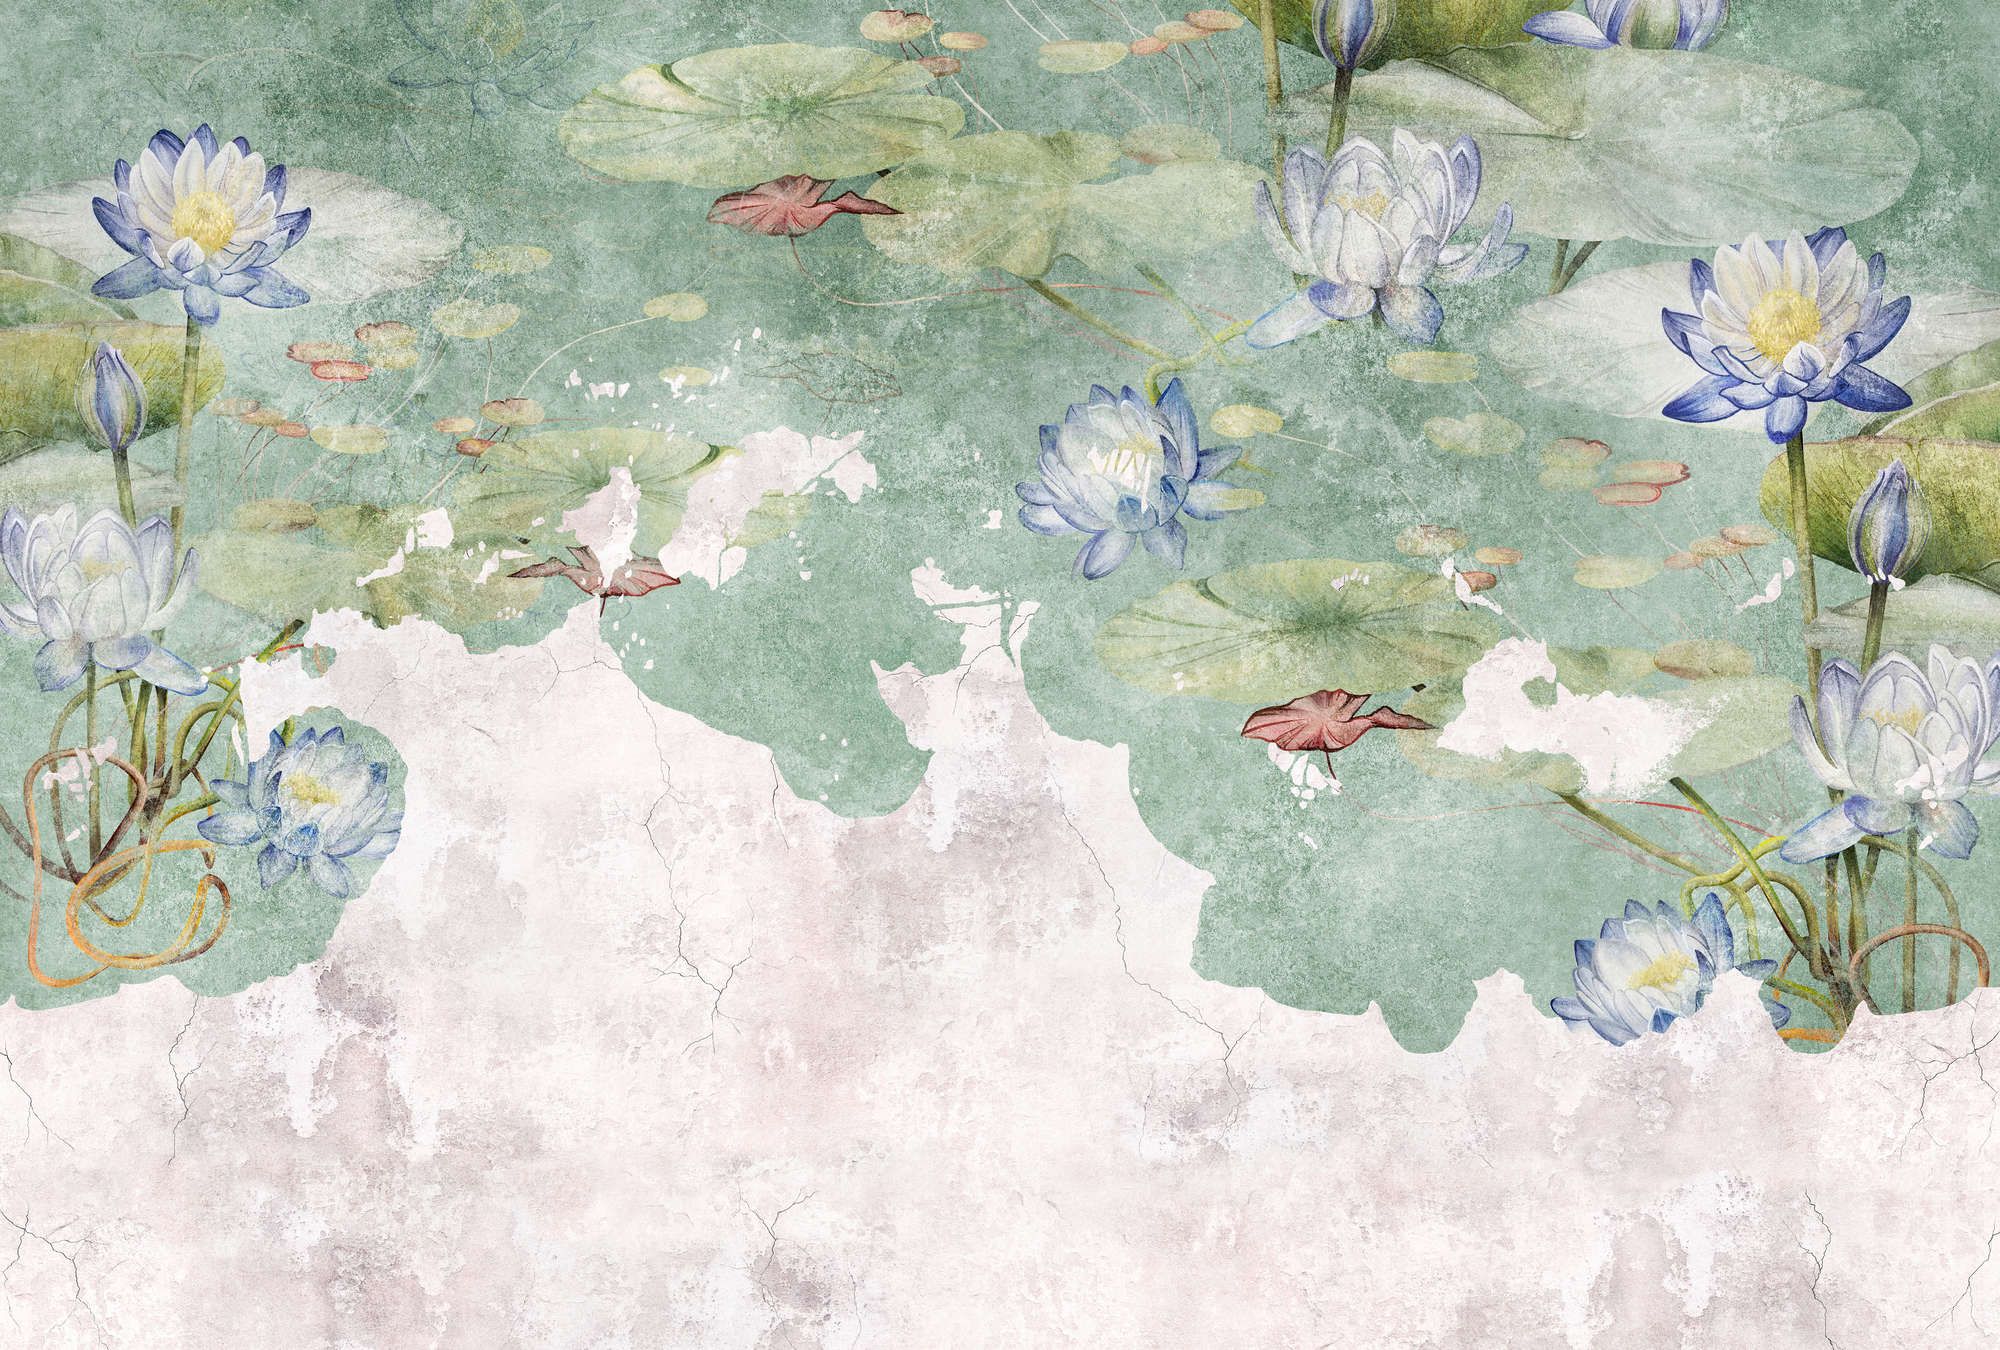             Photo wallpaper »lily« - Water lilies on vintage plaster structure in the background - Matt, smooth non-woven fabric
        